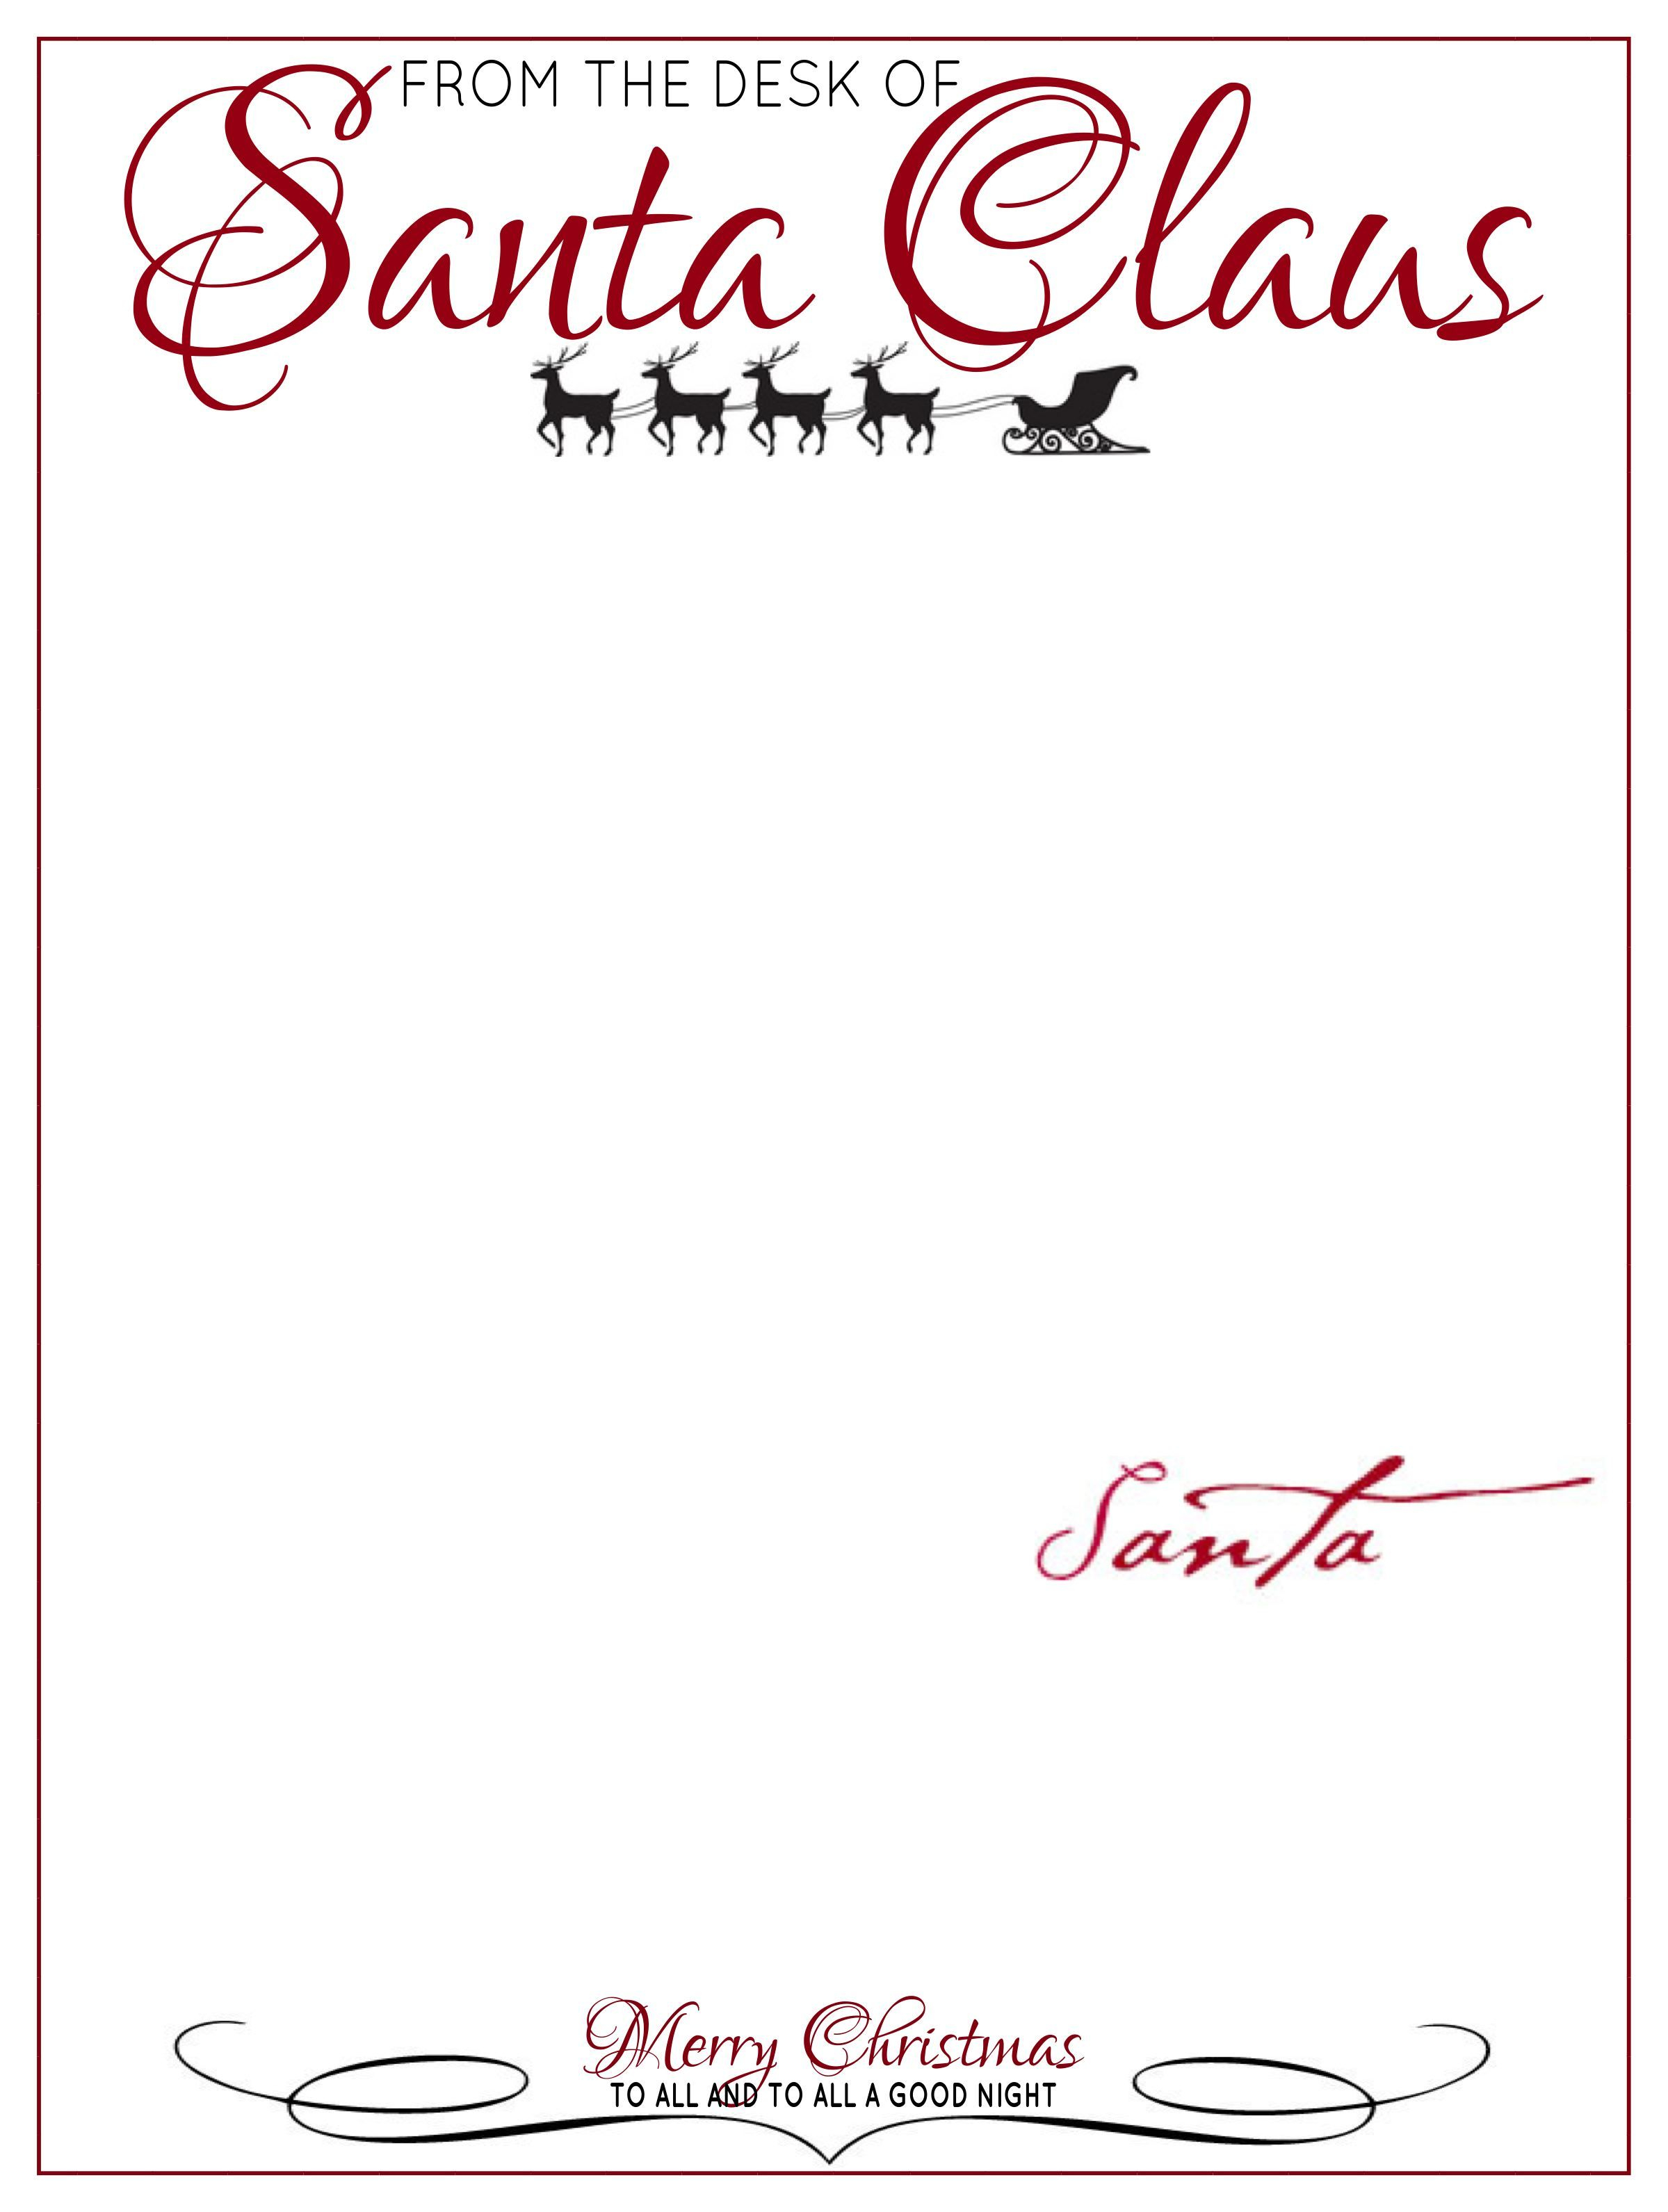 Santa Response Letter Template Collection - Letter Template Collection